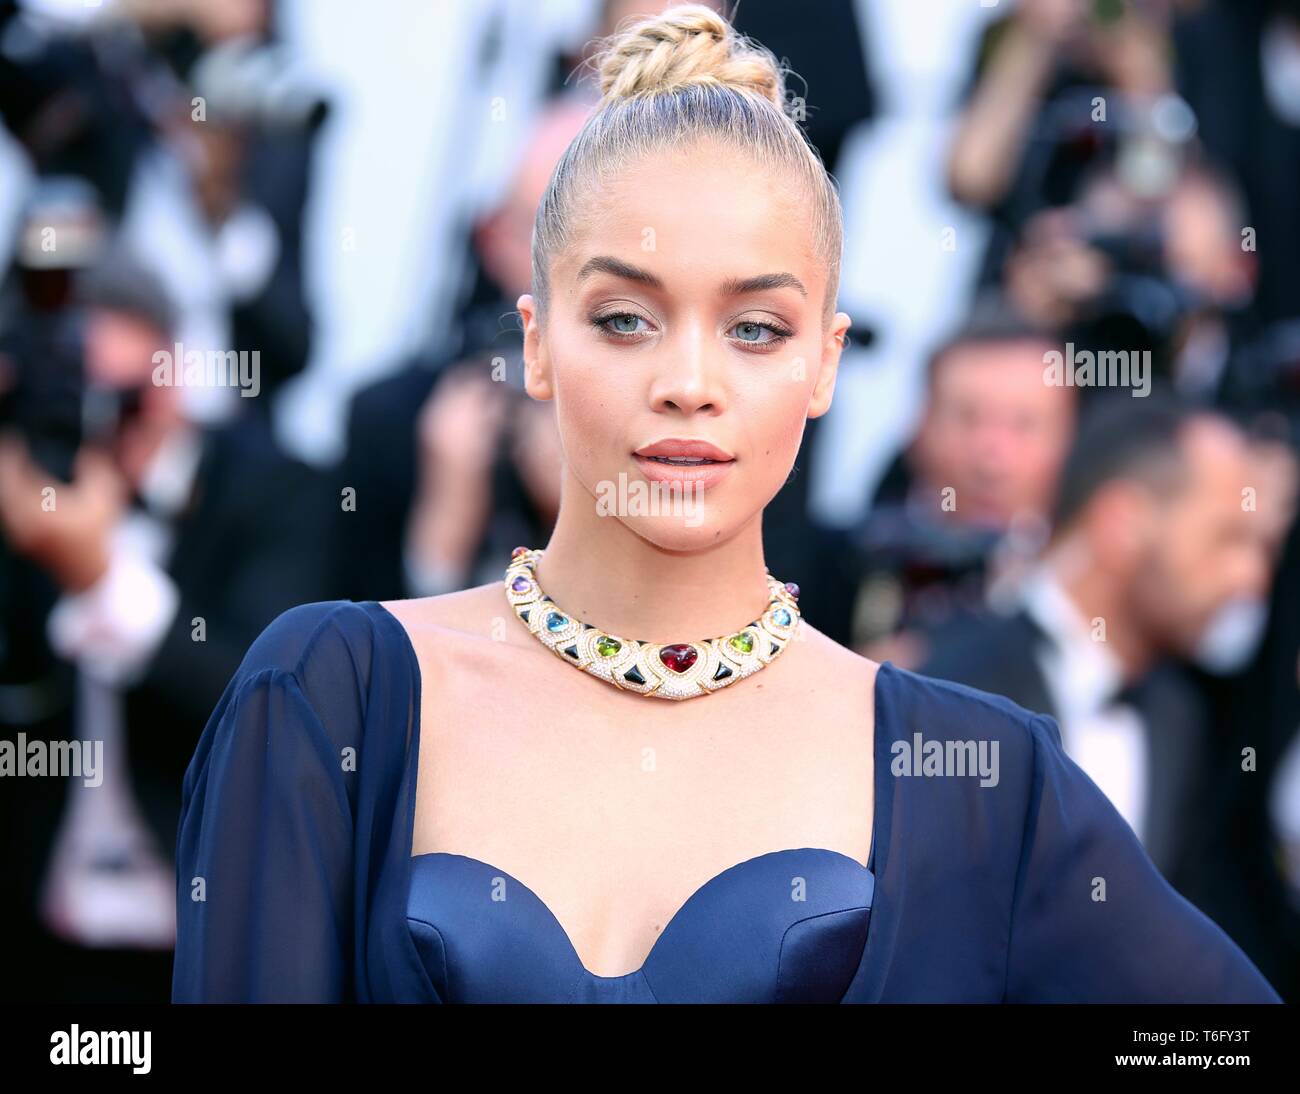 CANNES, FRANCE – MAY 22, 2017: Jasmine Sanders attends 'The Killing of a Sacred Deer' screening at the Cannes Film Festival (Photo: Mickael Chavet) Stock Photo